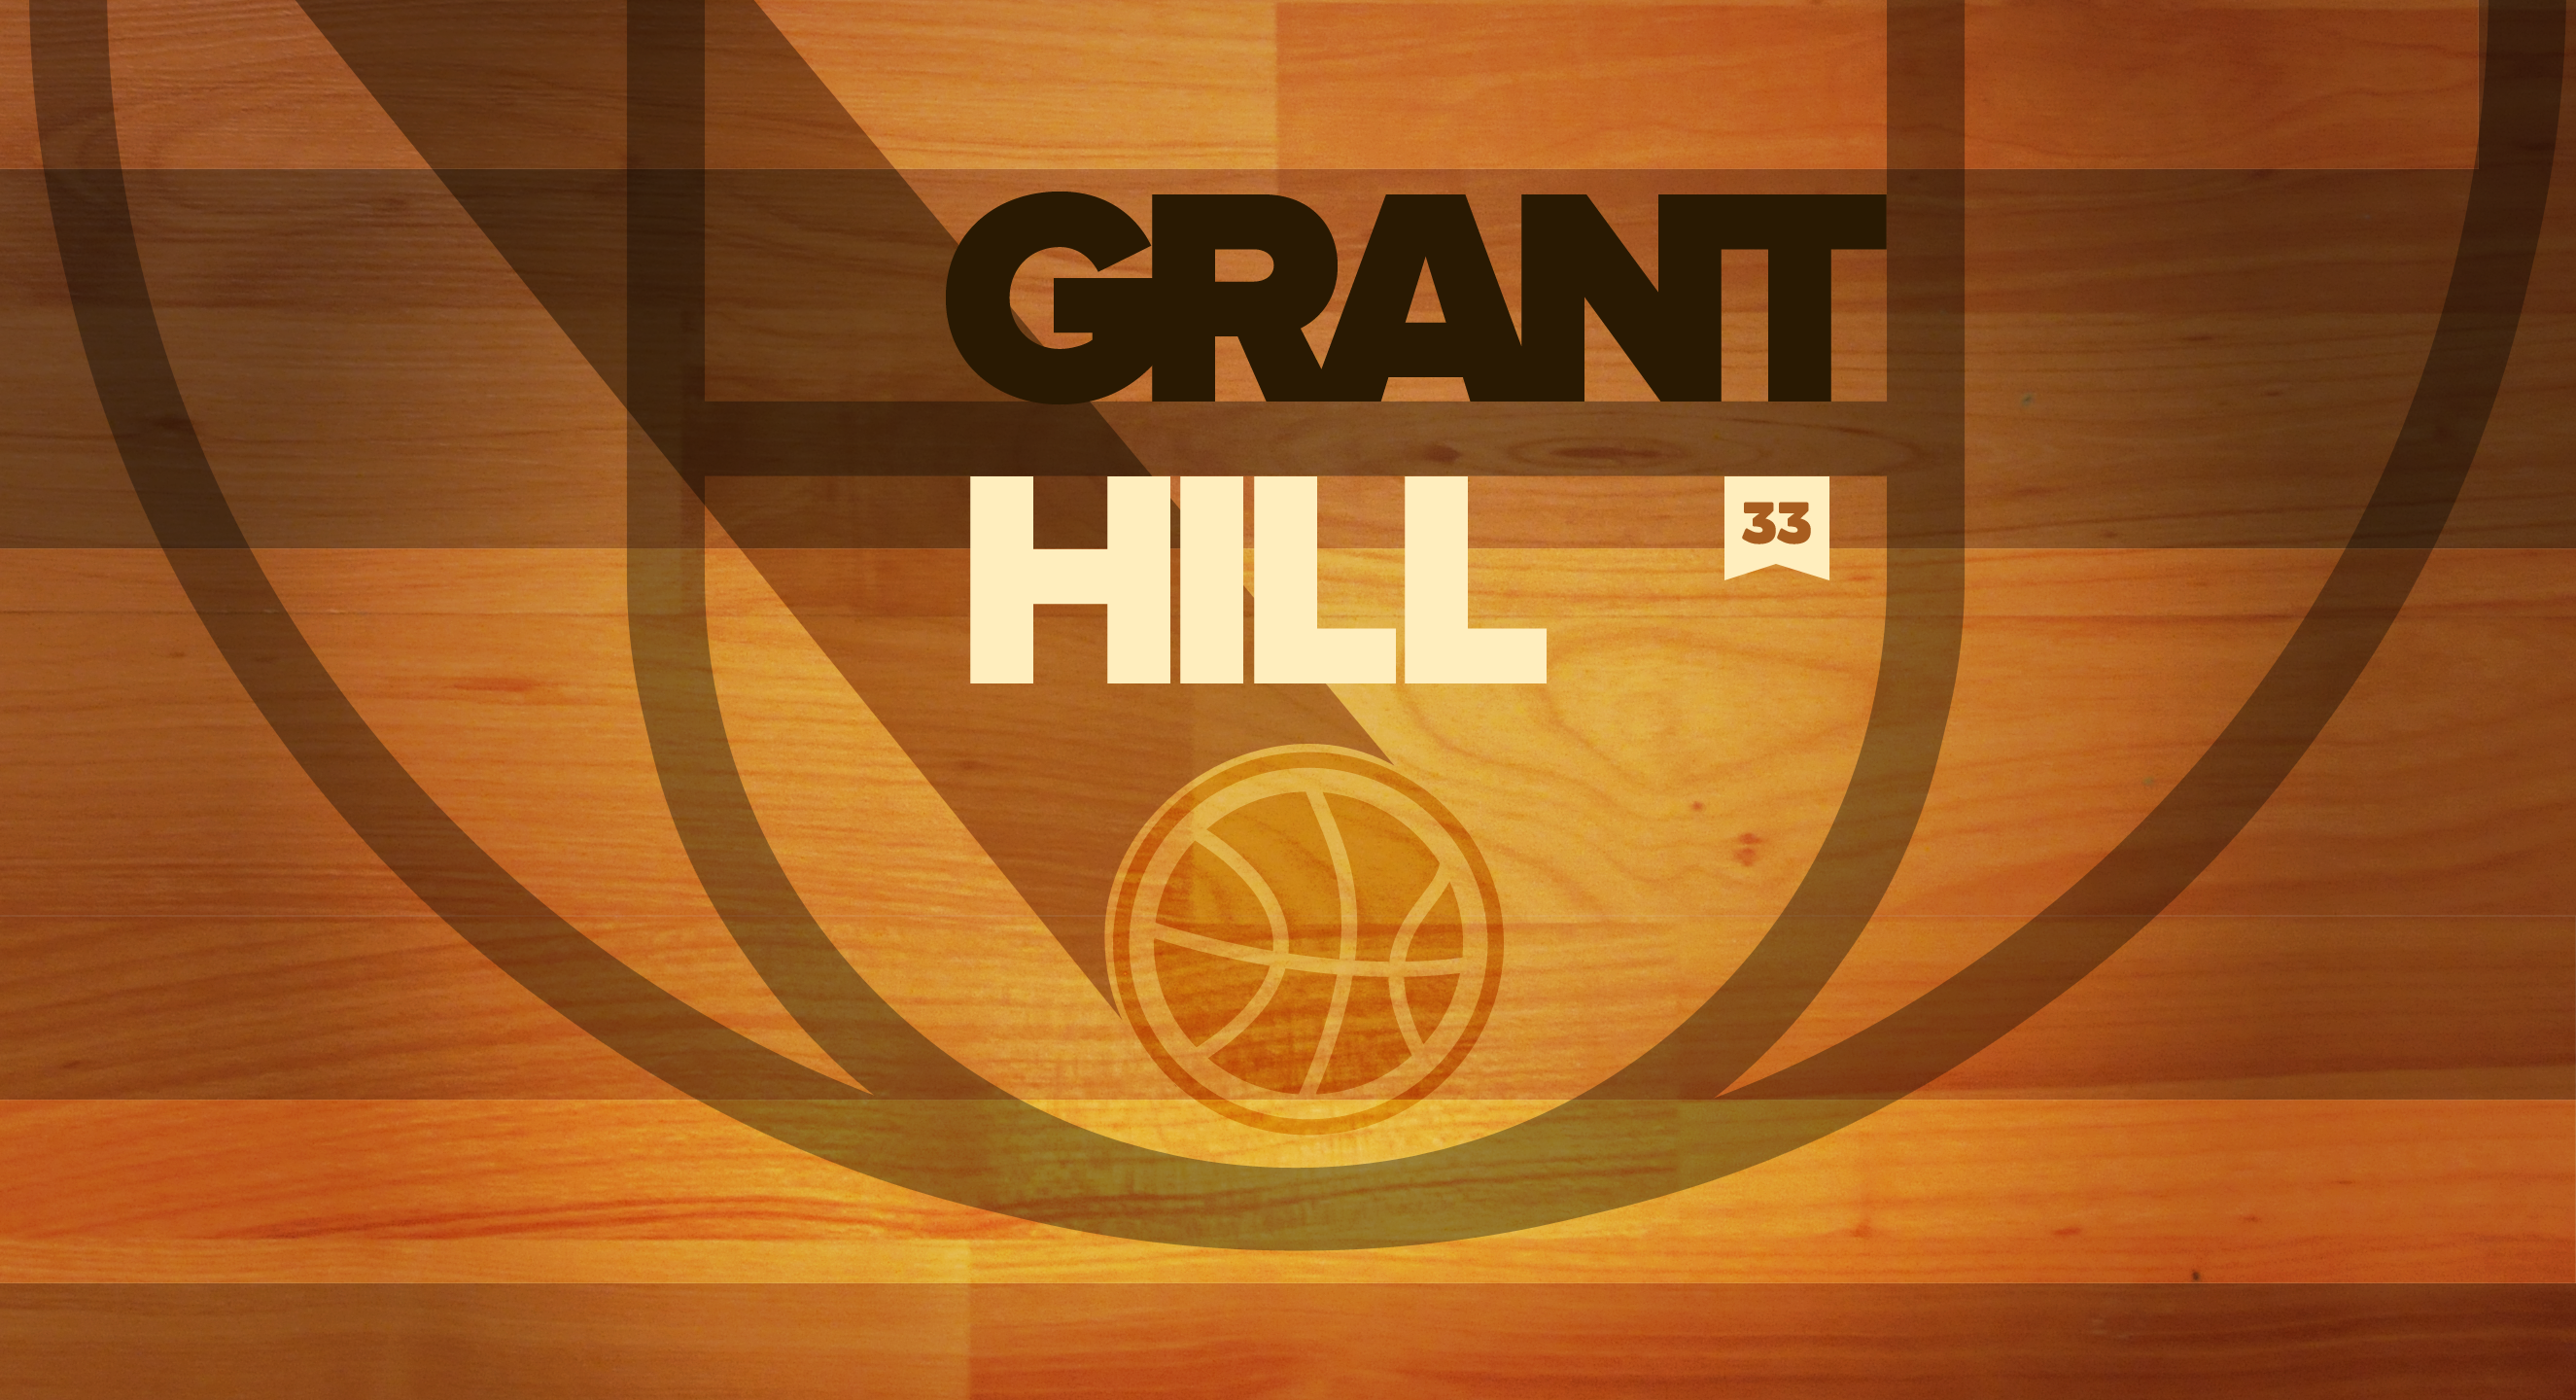 Your Wallpaper From Grant Hill